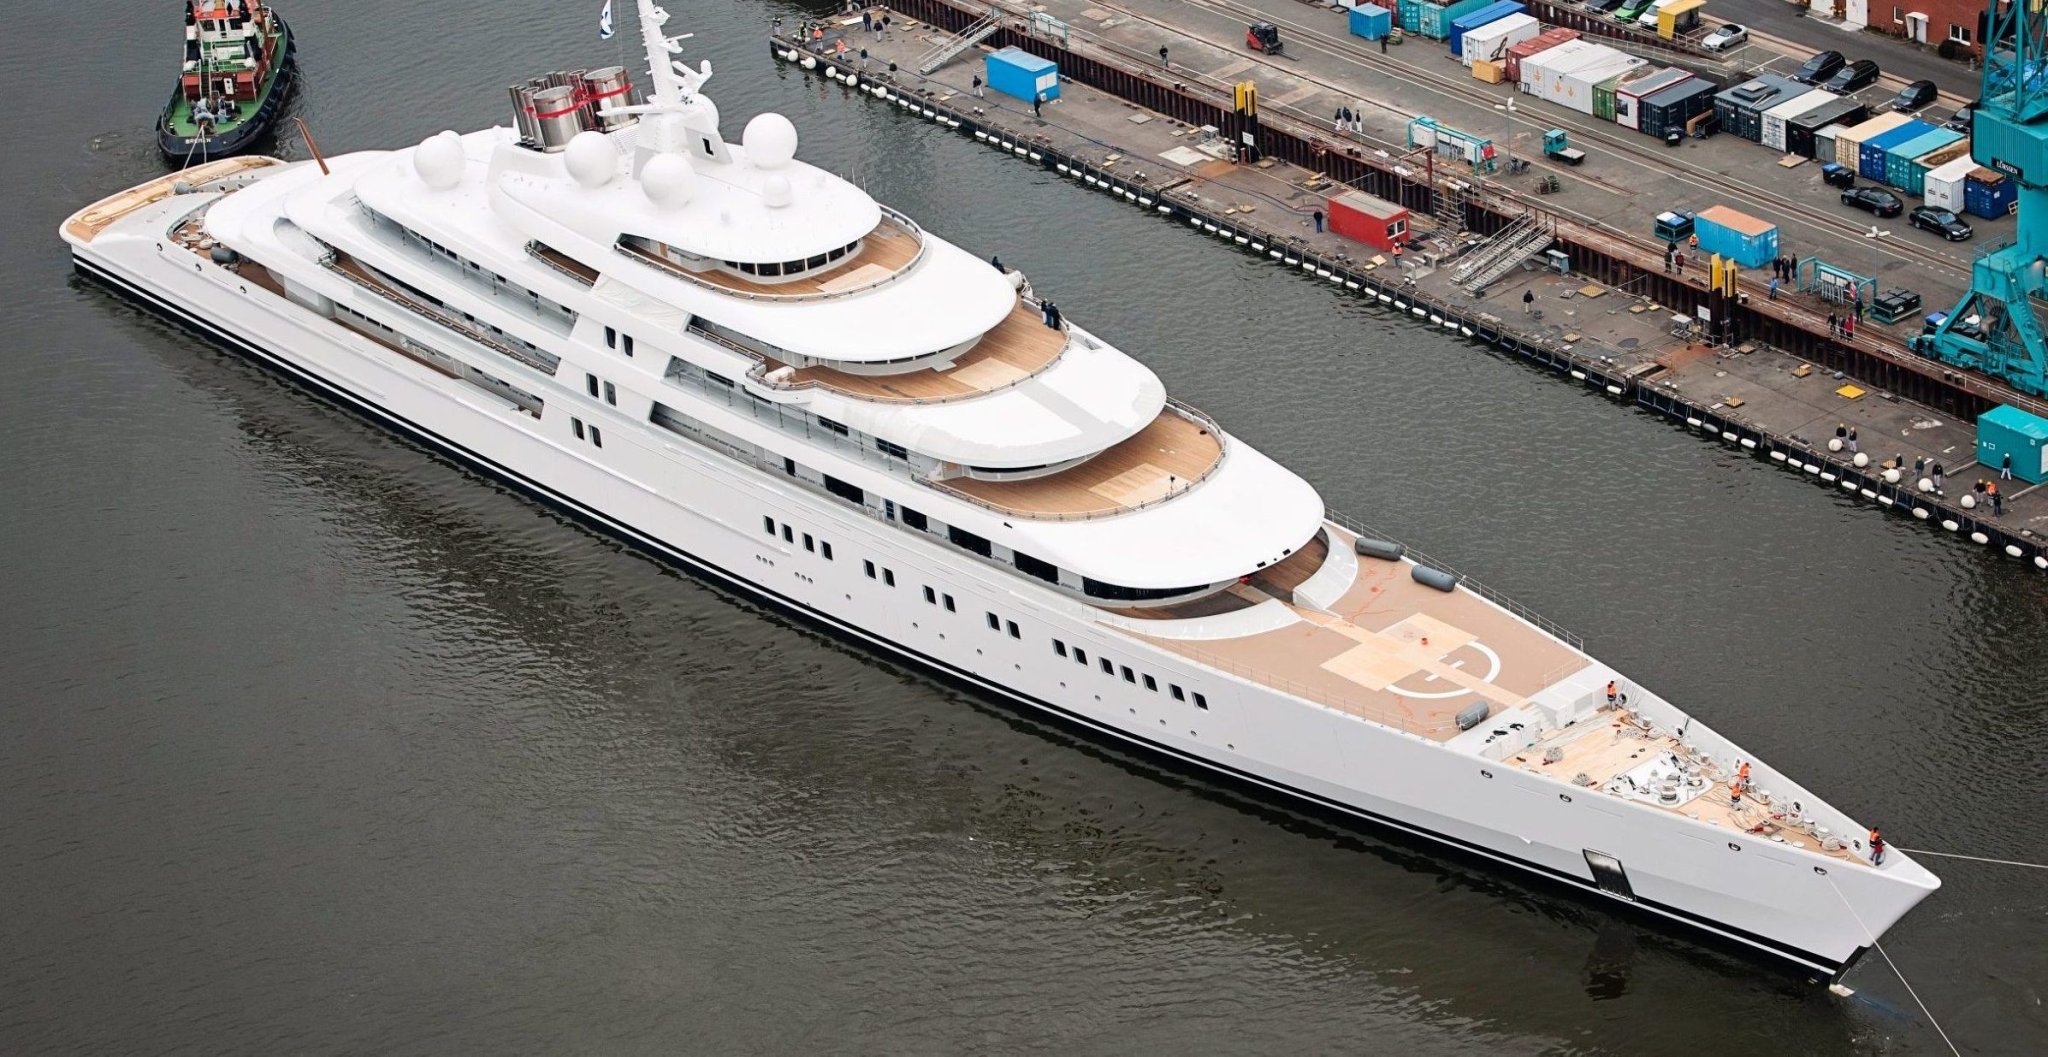 Here's How Much It Cost To Build The World's Most Expensive Luxury Yacht Azzam - cover